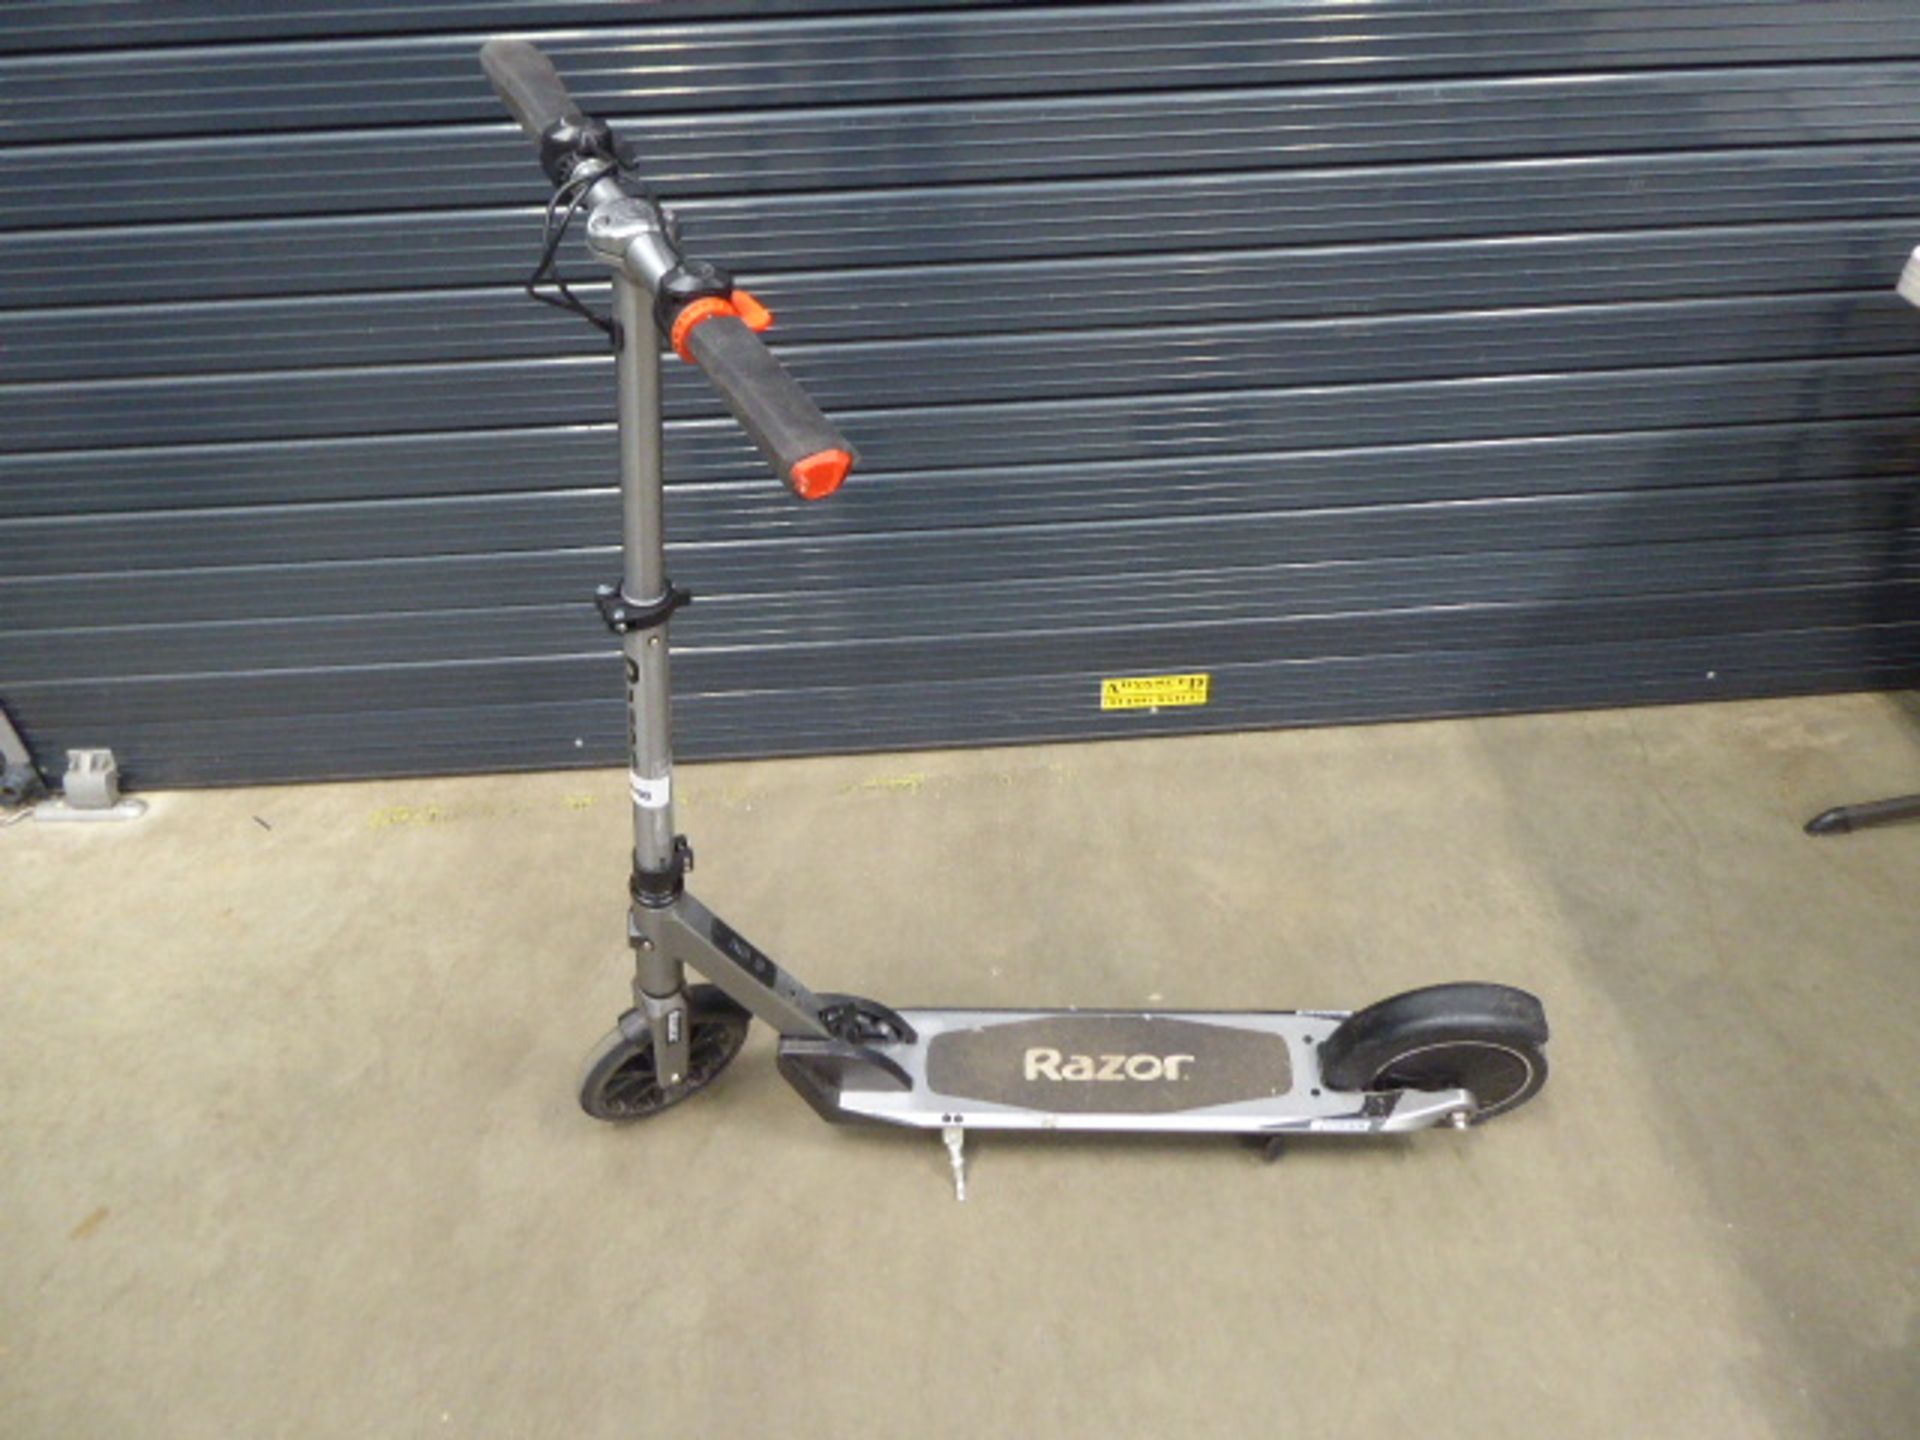 Razor electric scooter, no charger